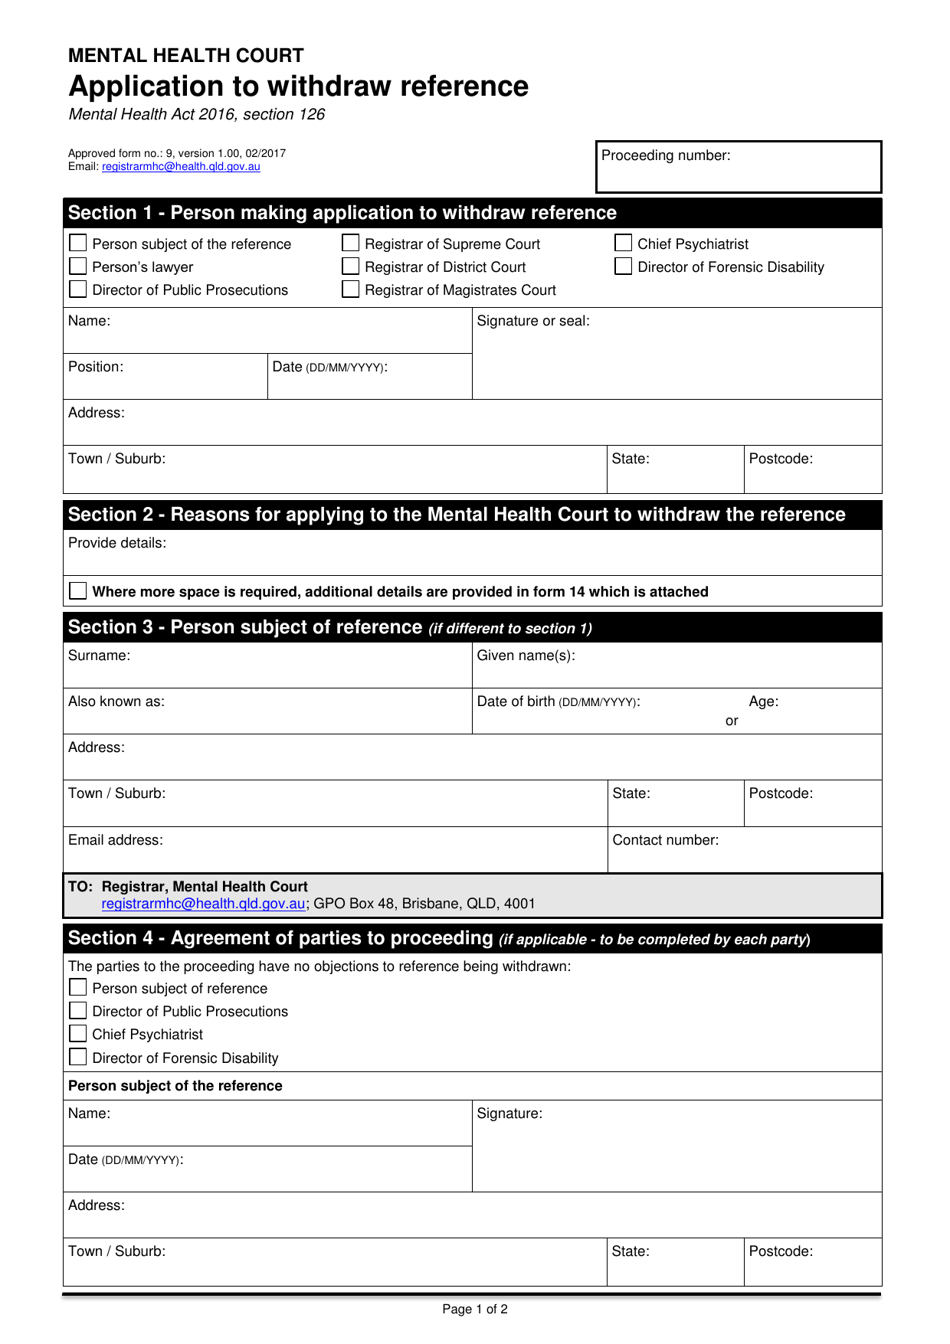 Form 9 Application to Withdraw Reference - Queensland, Australia, Page 1